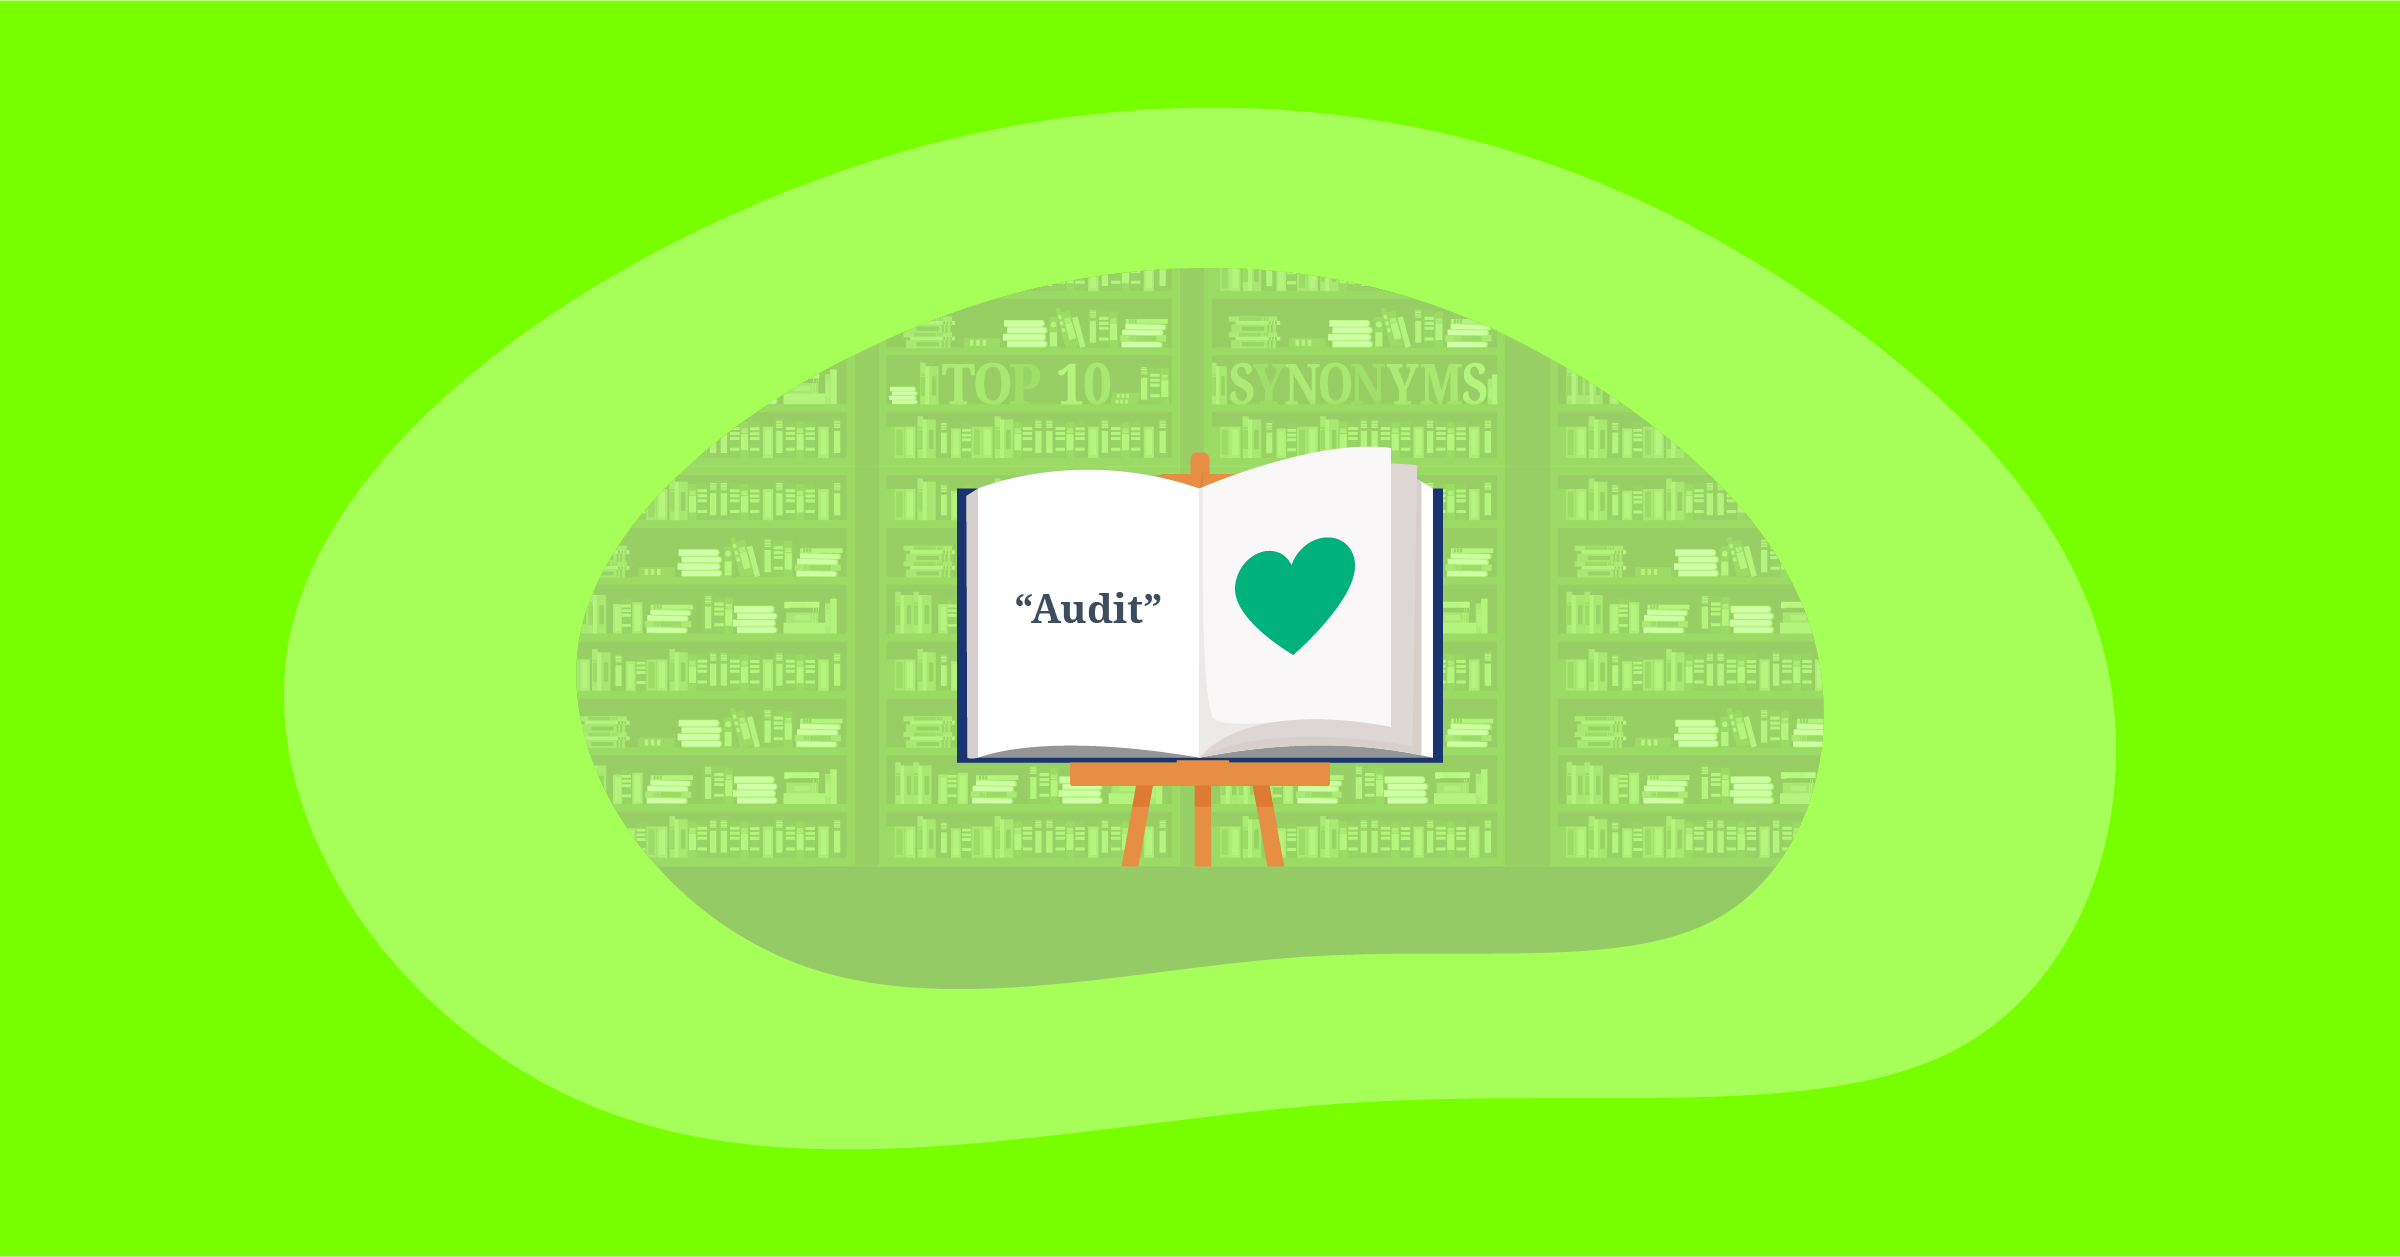 Illustration for Top 10 Positive & Impactful Synonyms for “Audit”